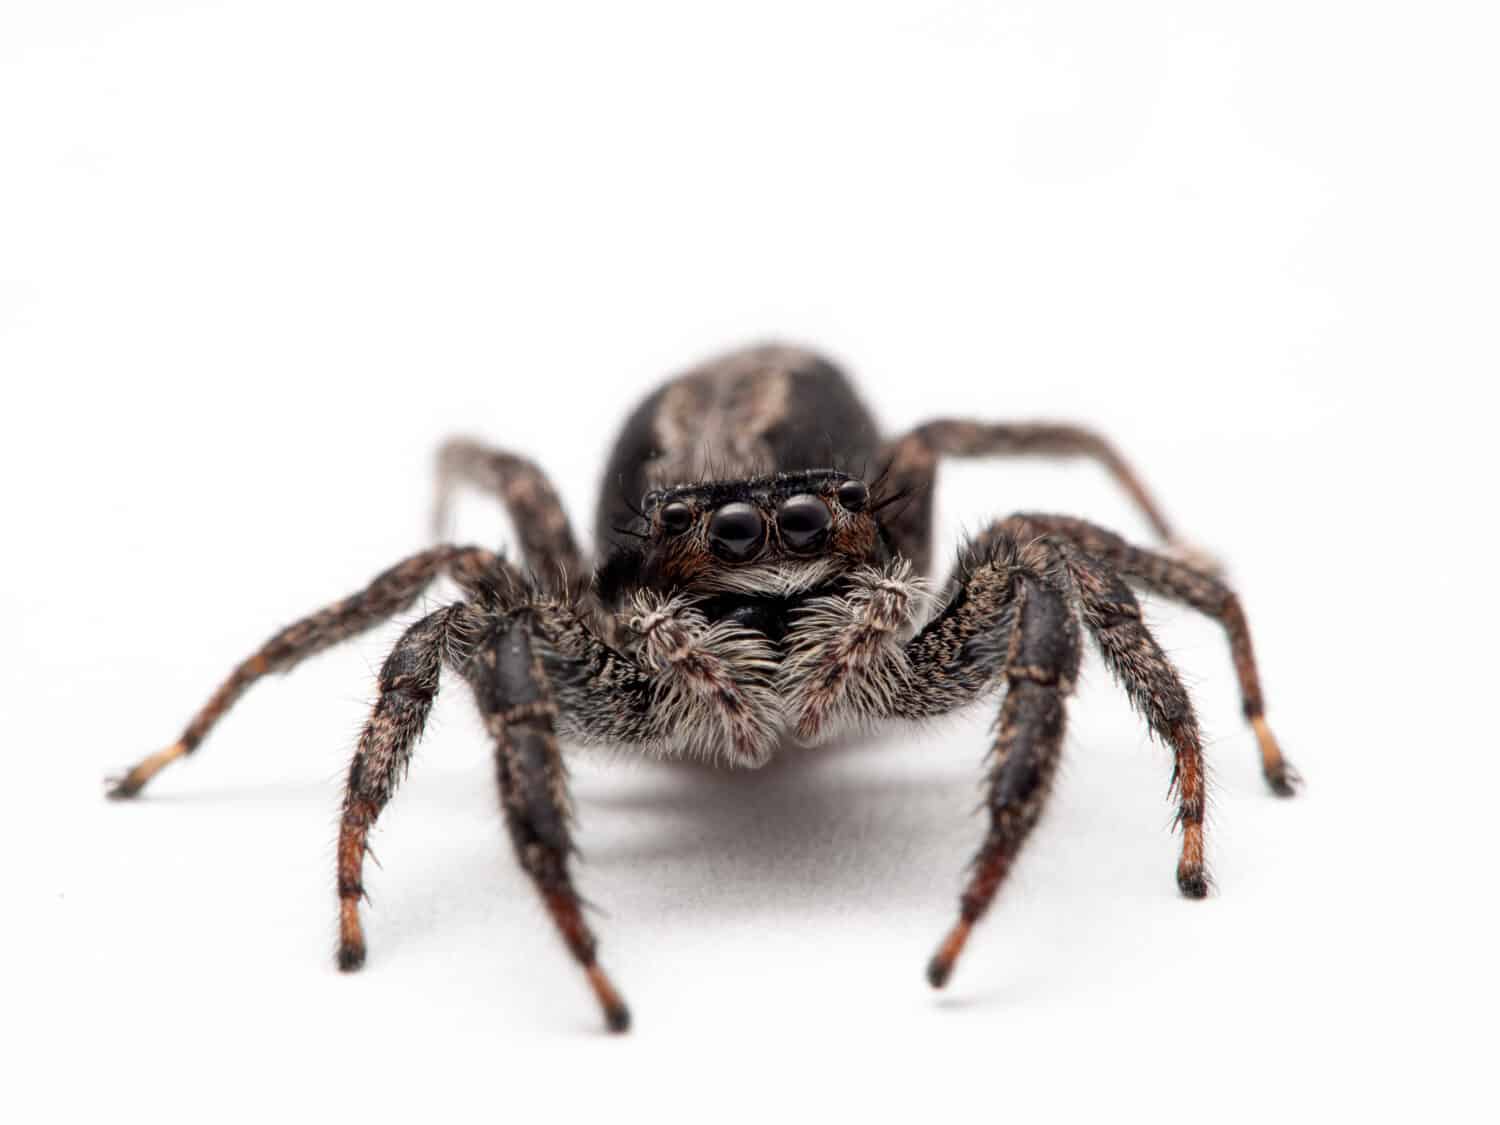 Female Platycryptus californicus jumping spider, on white background, looking up at the camera. This species is distributed throughout the western USA and Canada.